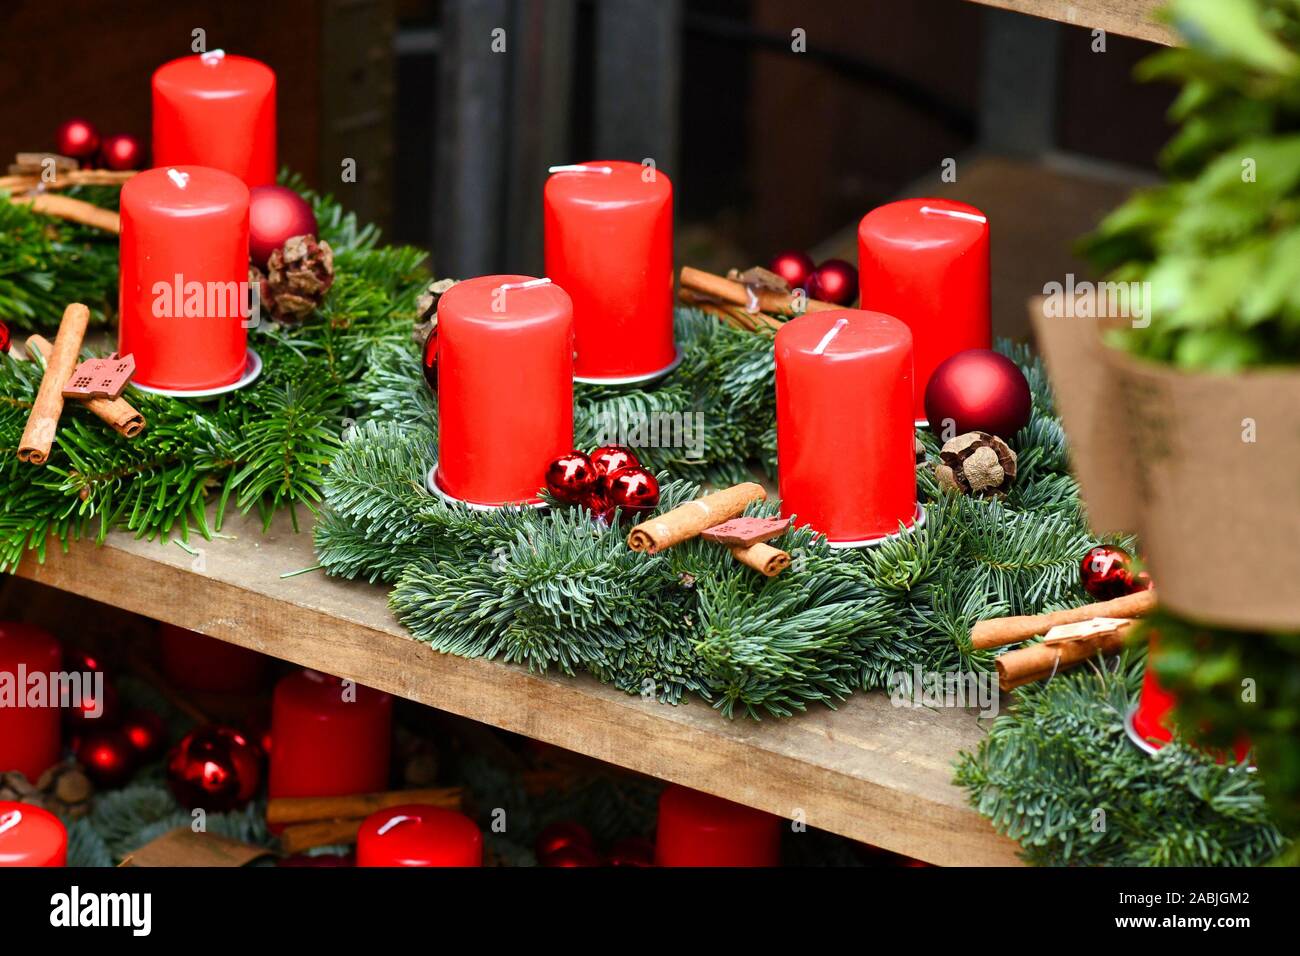 Traditional advent wreaths with four red candles and seasonal Christmas  decorations for sale on wooden shelf Stock Photo - Alamy